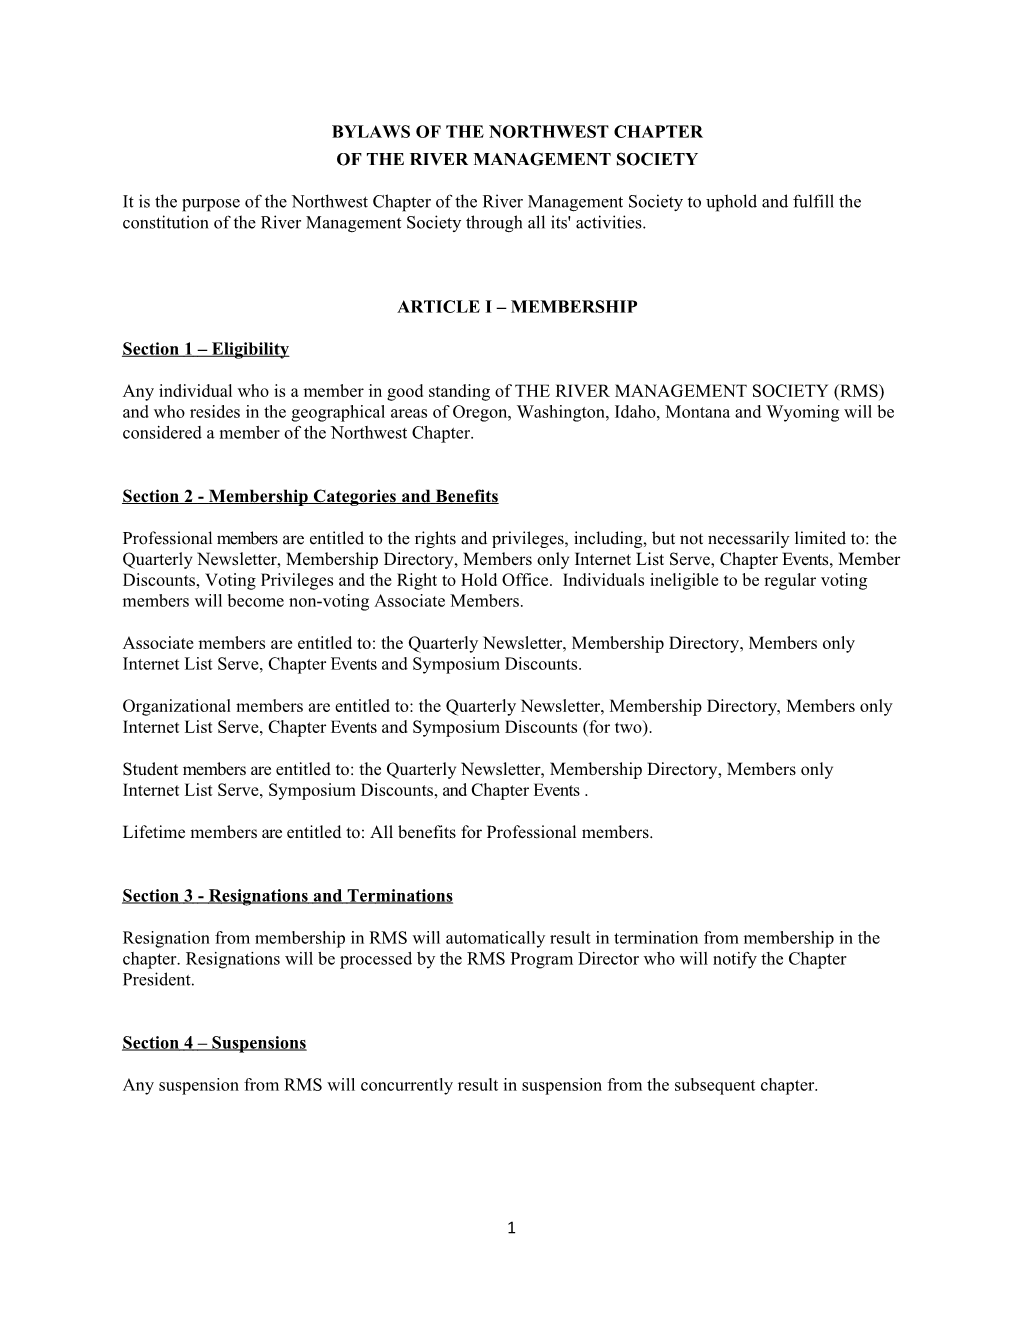 BYLAWS of the NORTHWEST CHAPTER of RMS